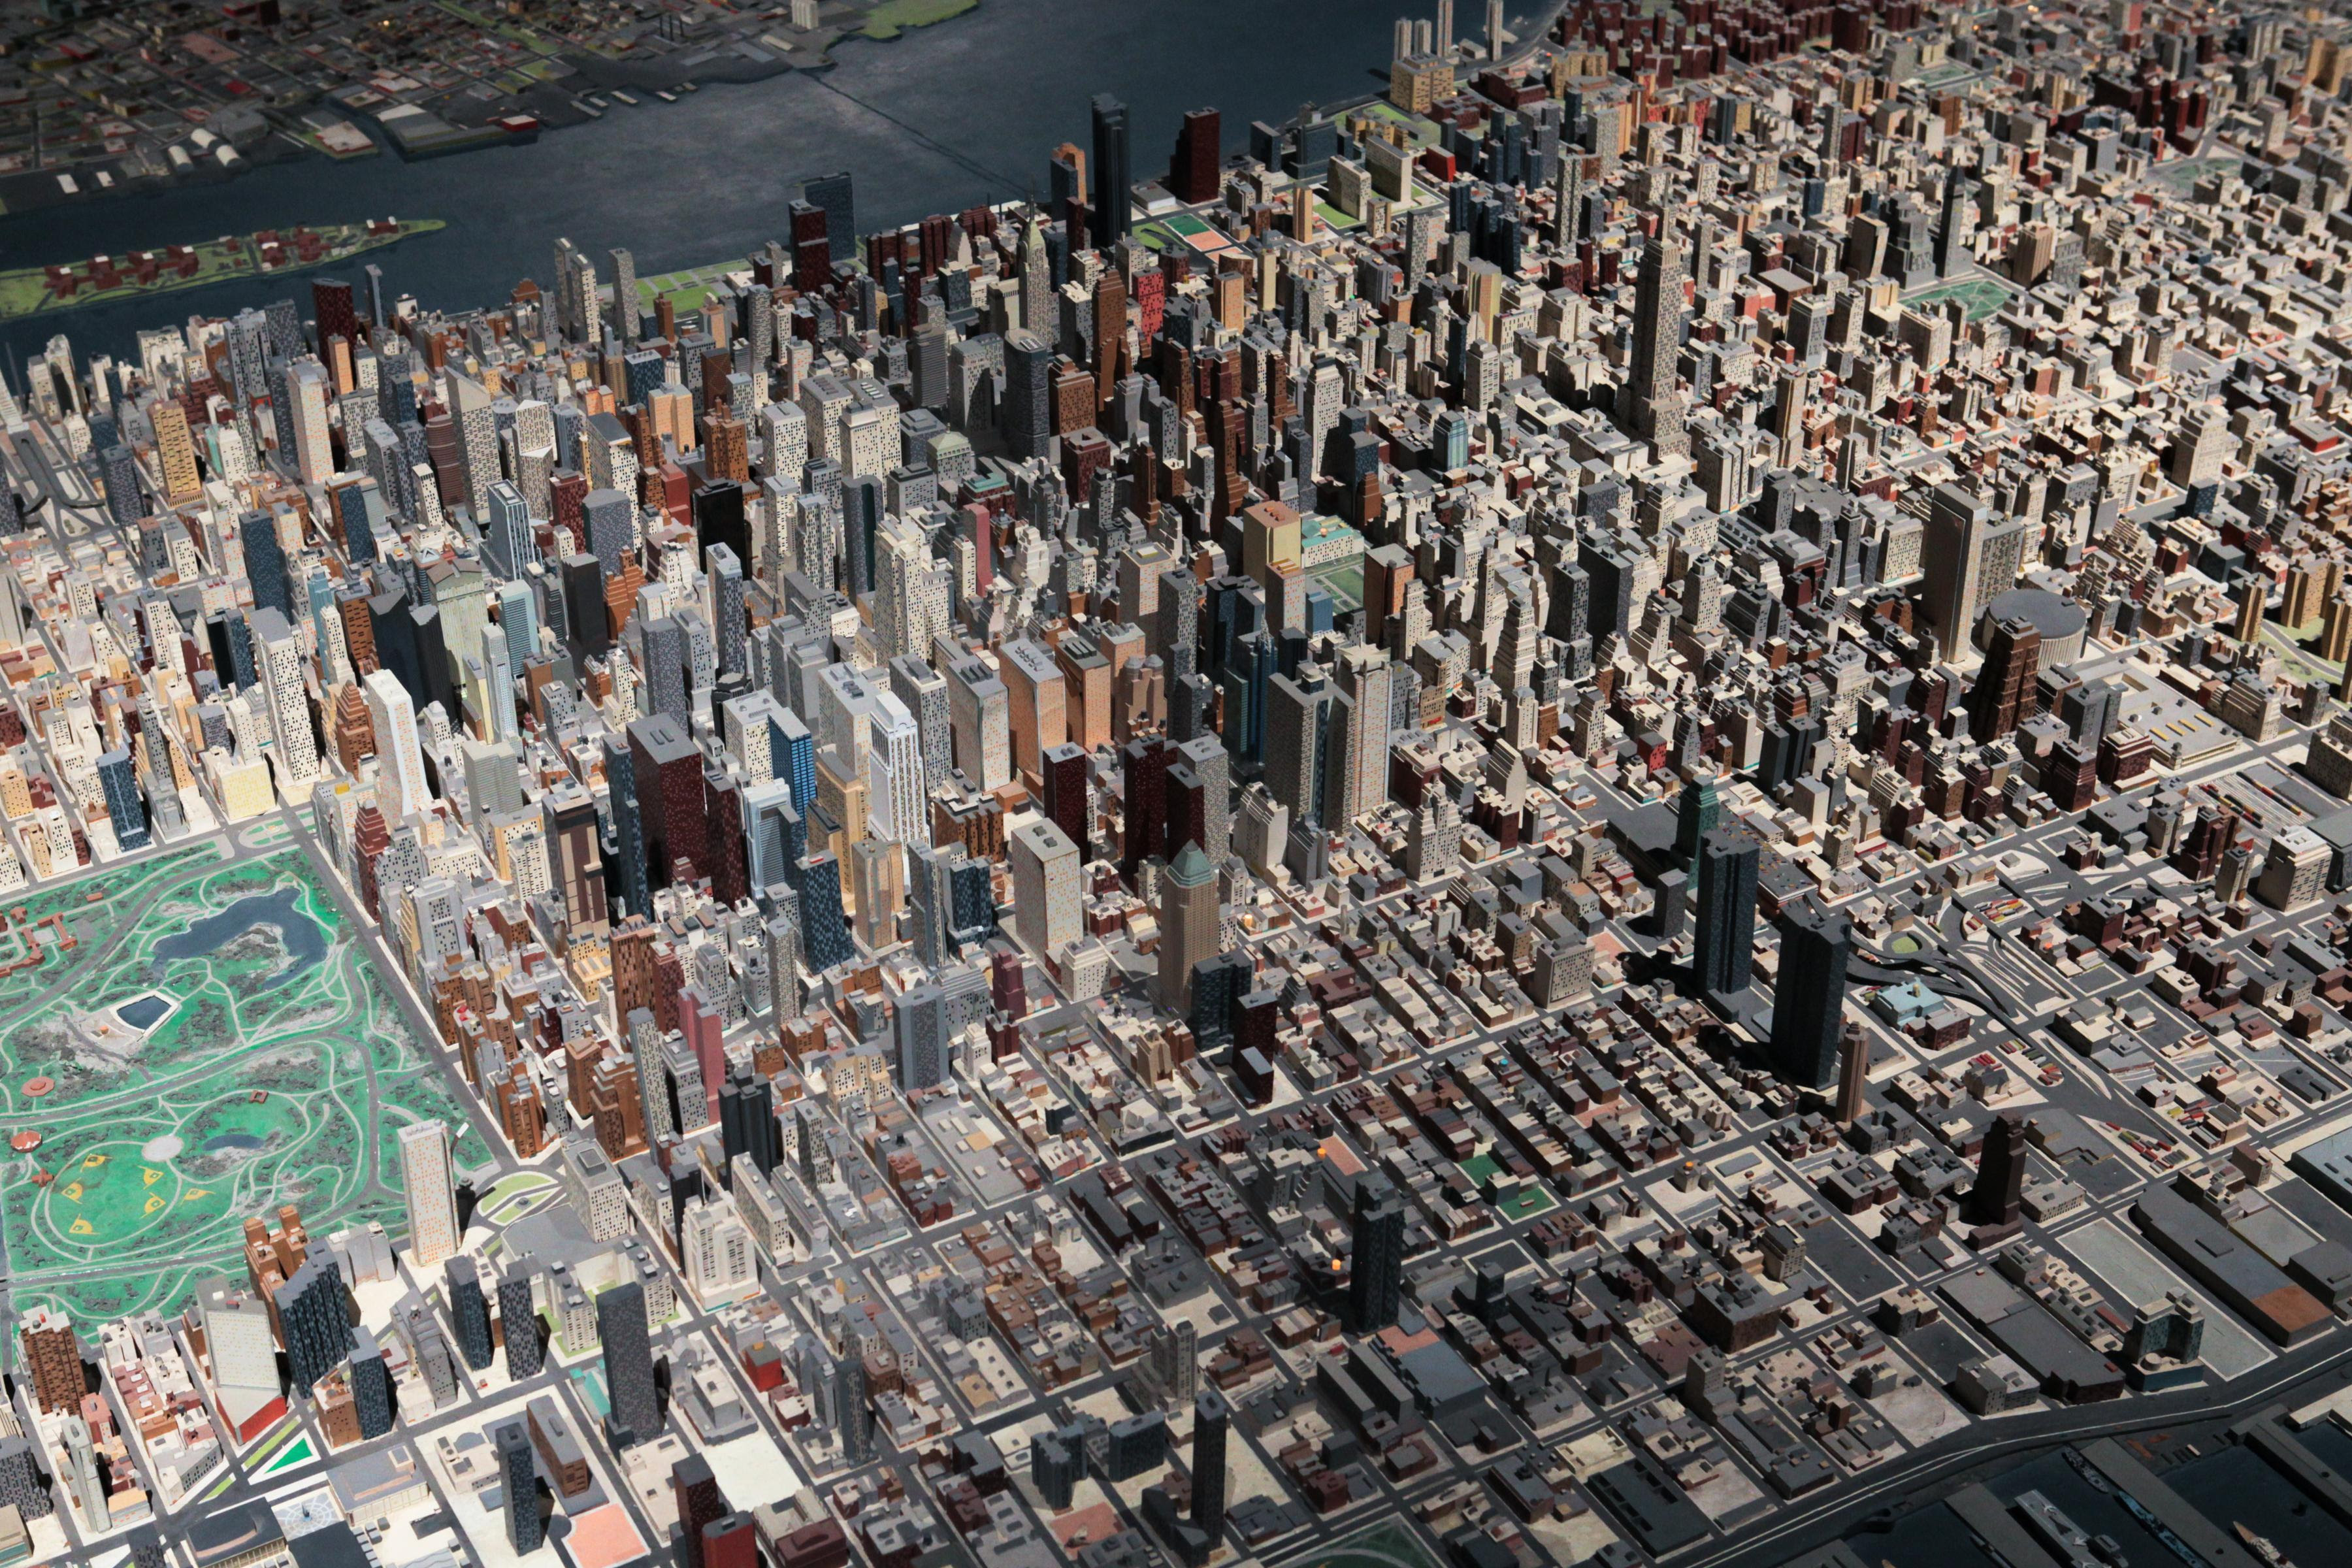 An overhead, zoomed-in view of midtown on The Panorama of the City of New York.